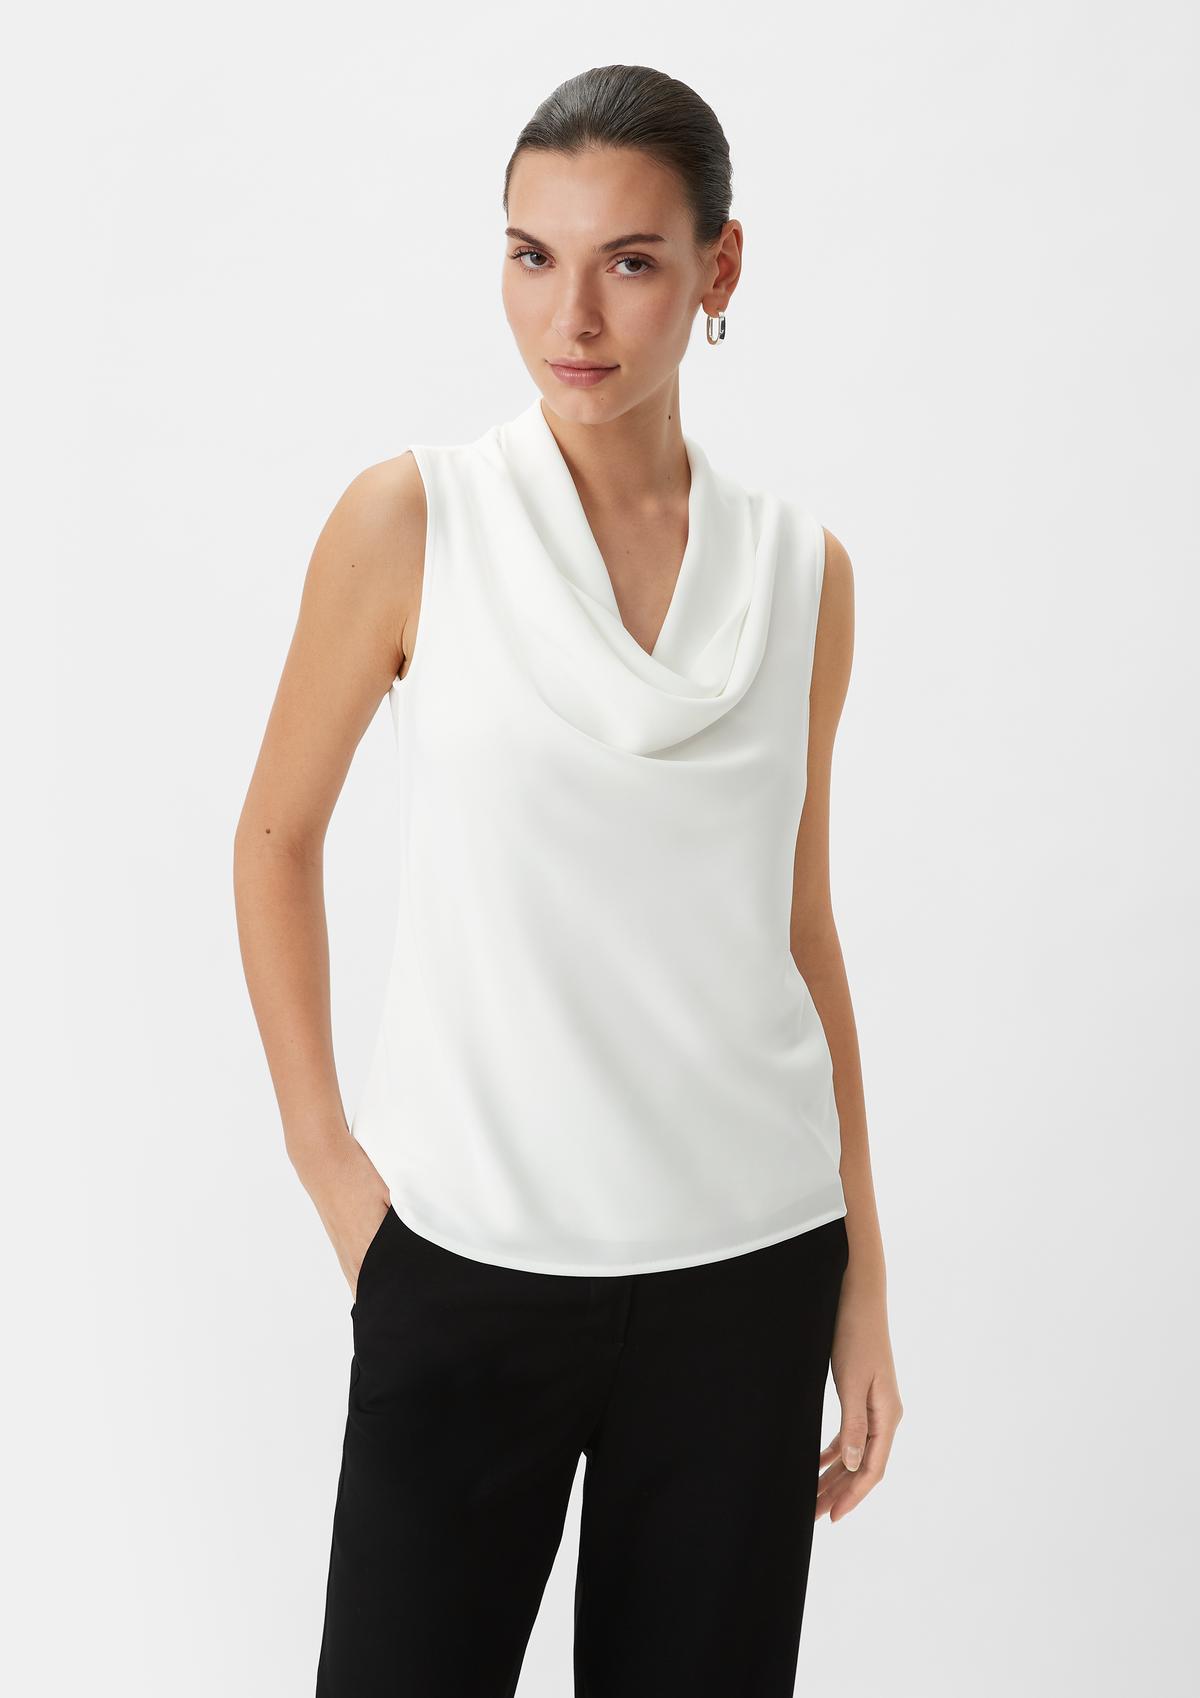 Comma for New Tops | Women